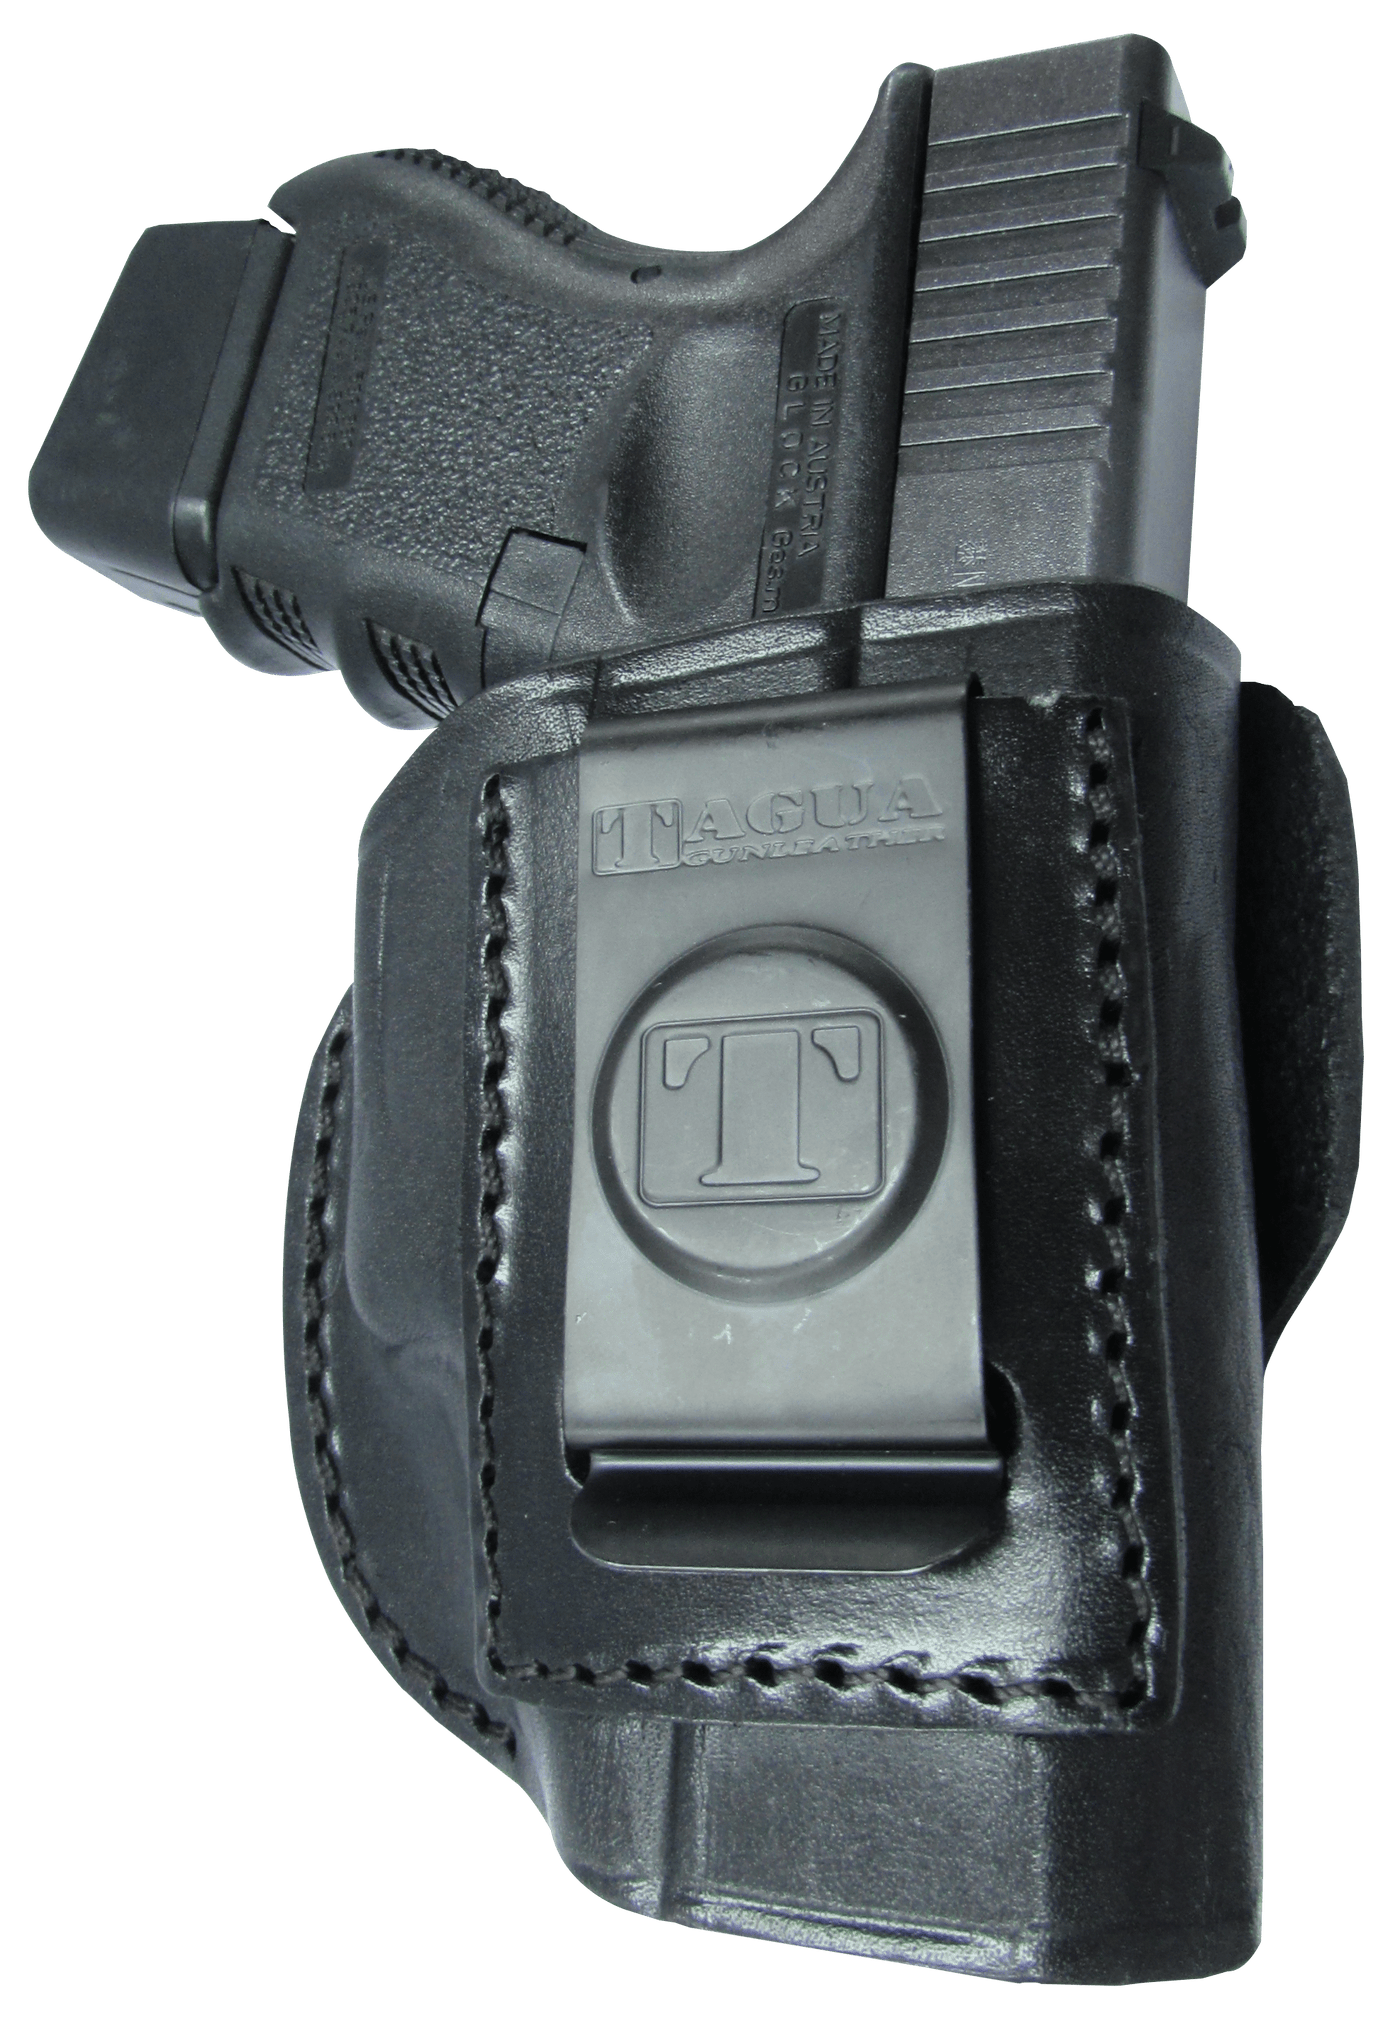 Tagua Tagua 4 In 1 Inside The Pant - Holster Springfield Xds Blk Rh Holsters And Related Items